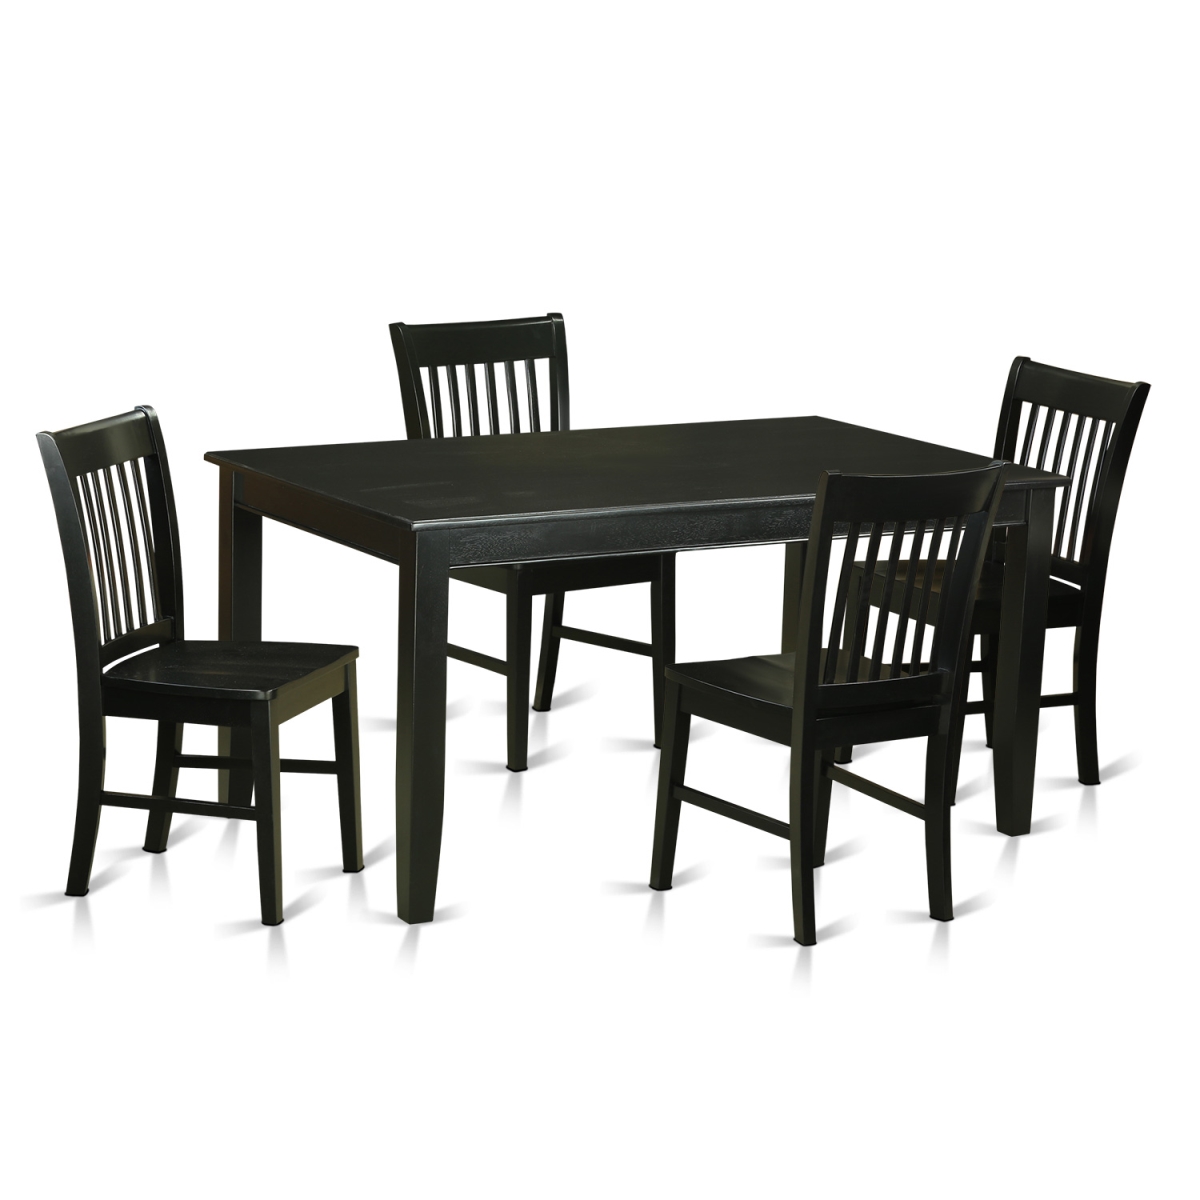 Duno5-blk-w Wood Seat Dinette Set - Table & 4 Chairs, Black - 5 Piece